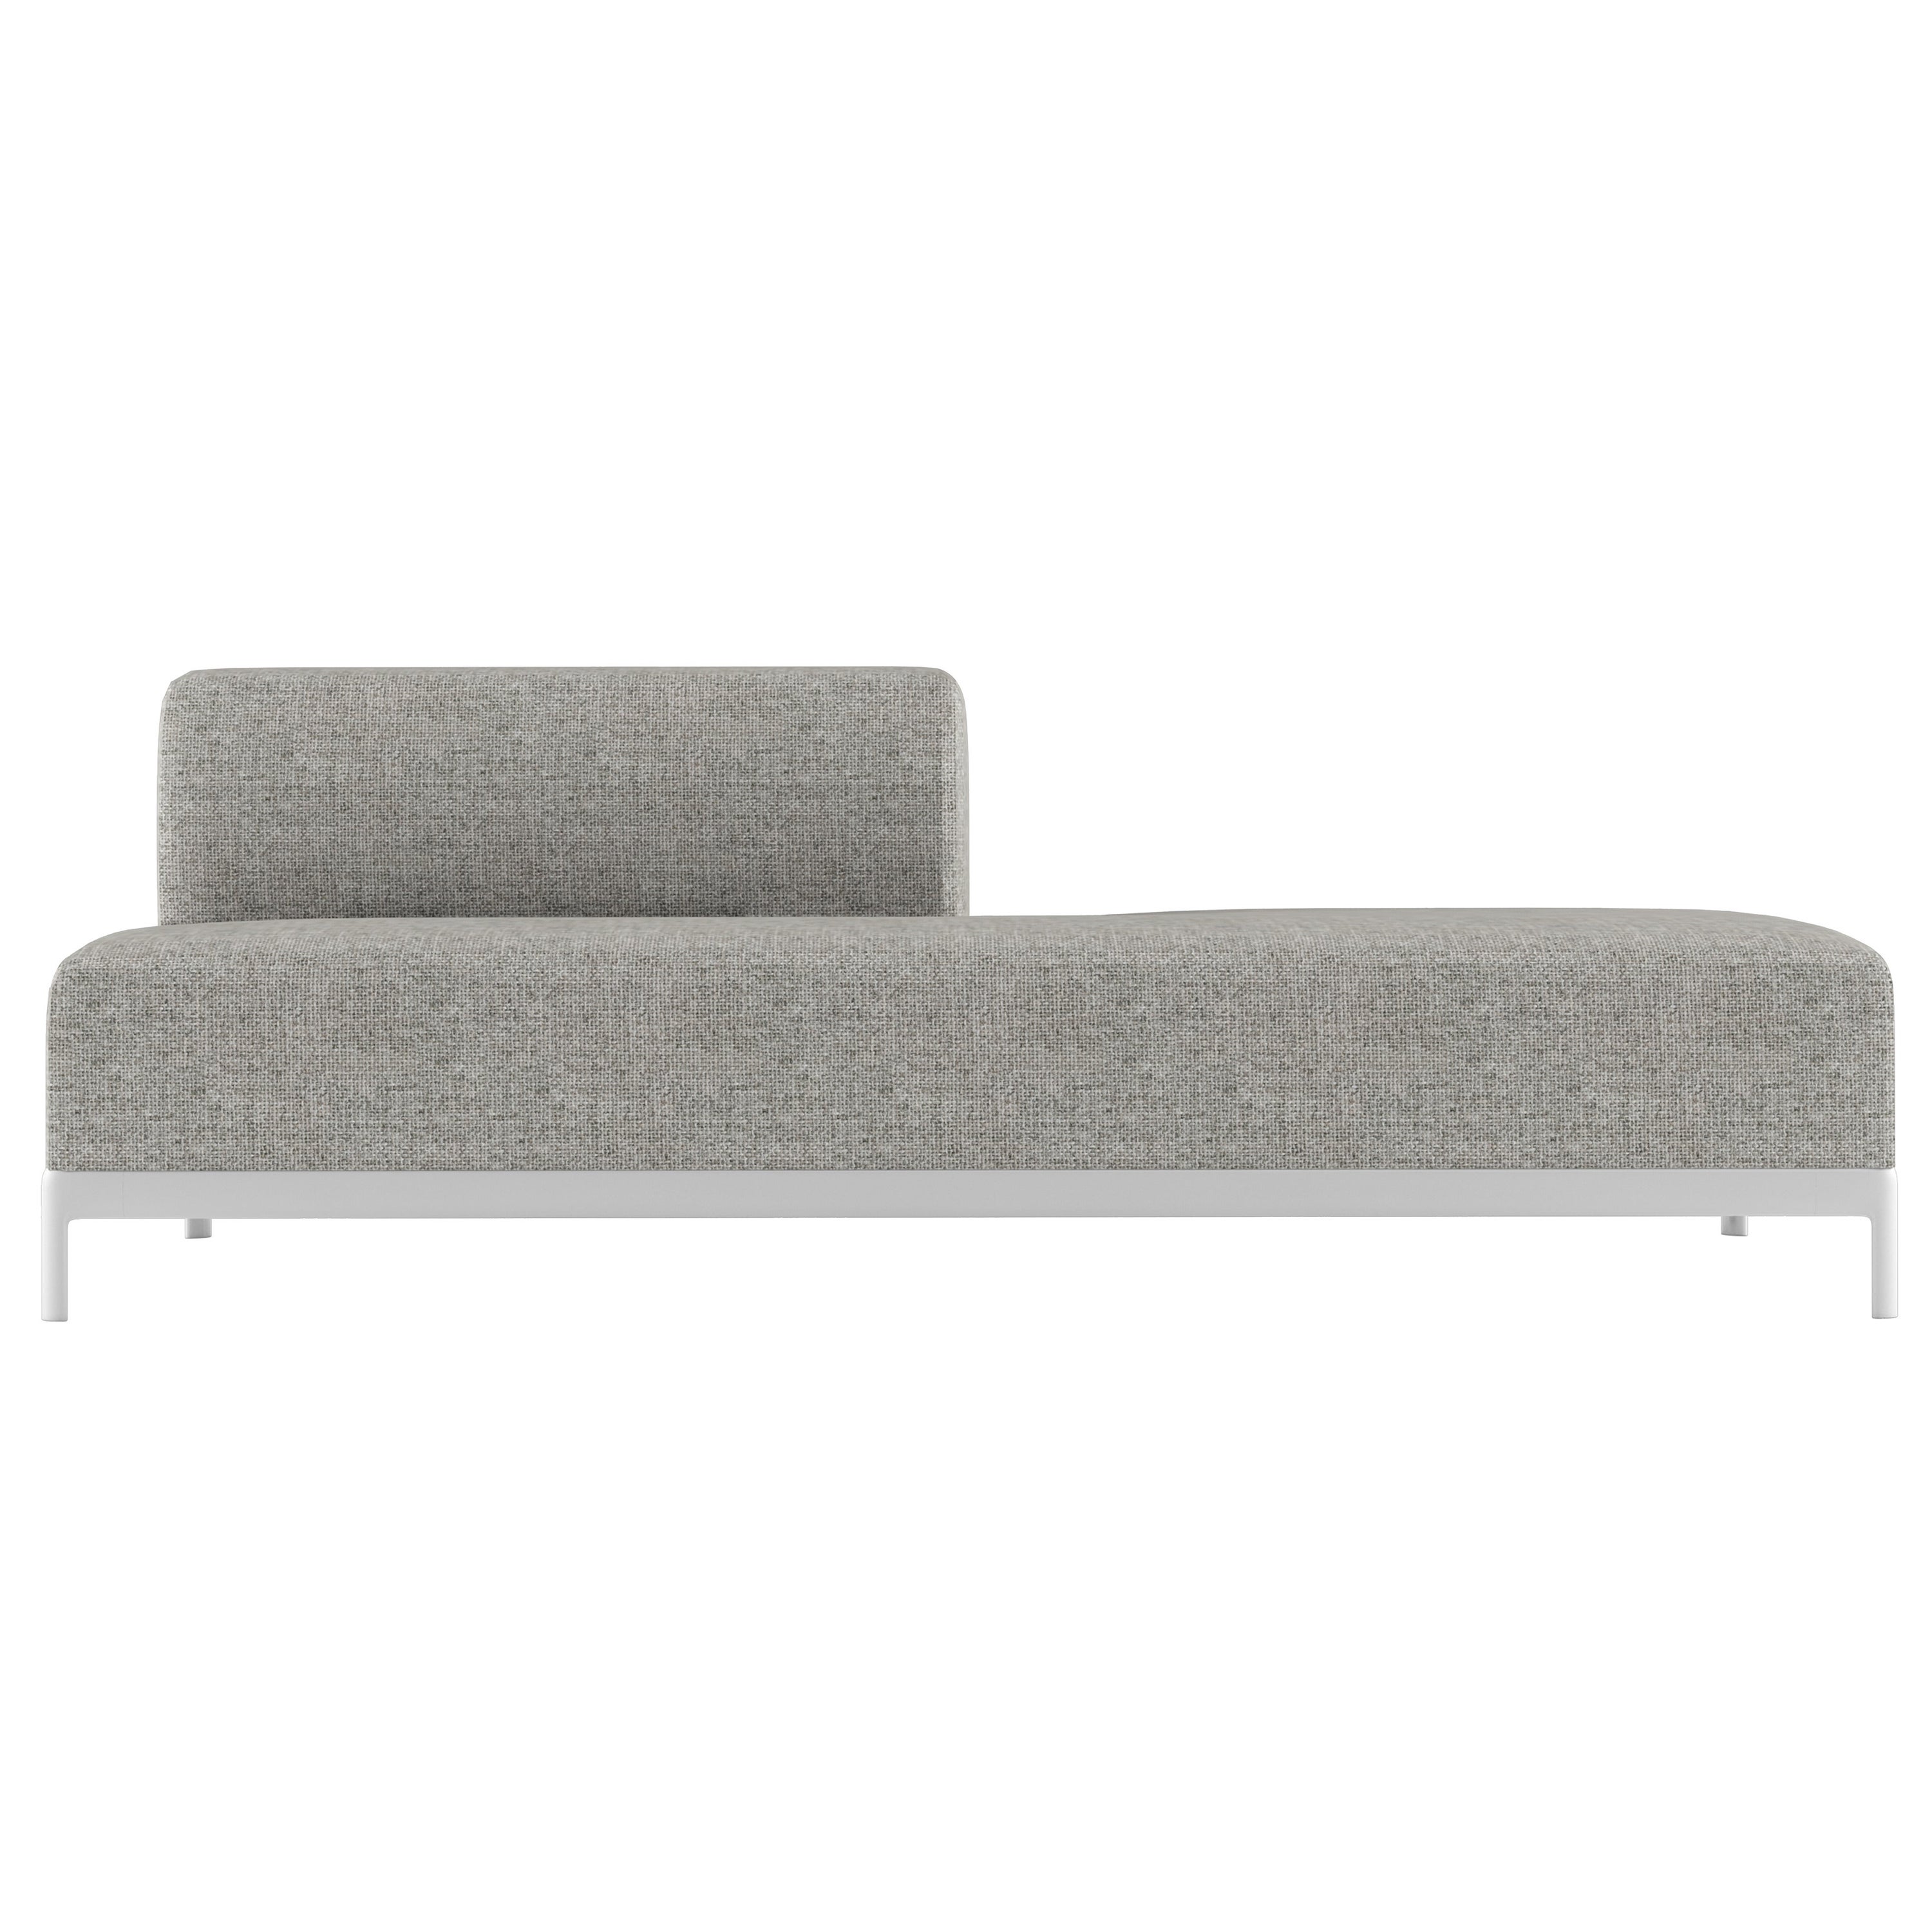 Alias P66 AluZen Soft Ending Sofa Outdoor DX in Upholstery with Aluminium Frame For Sale